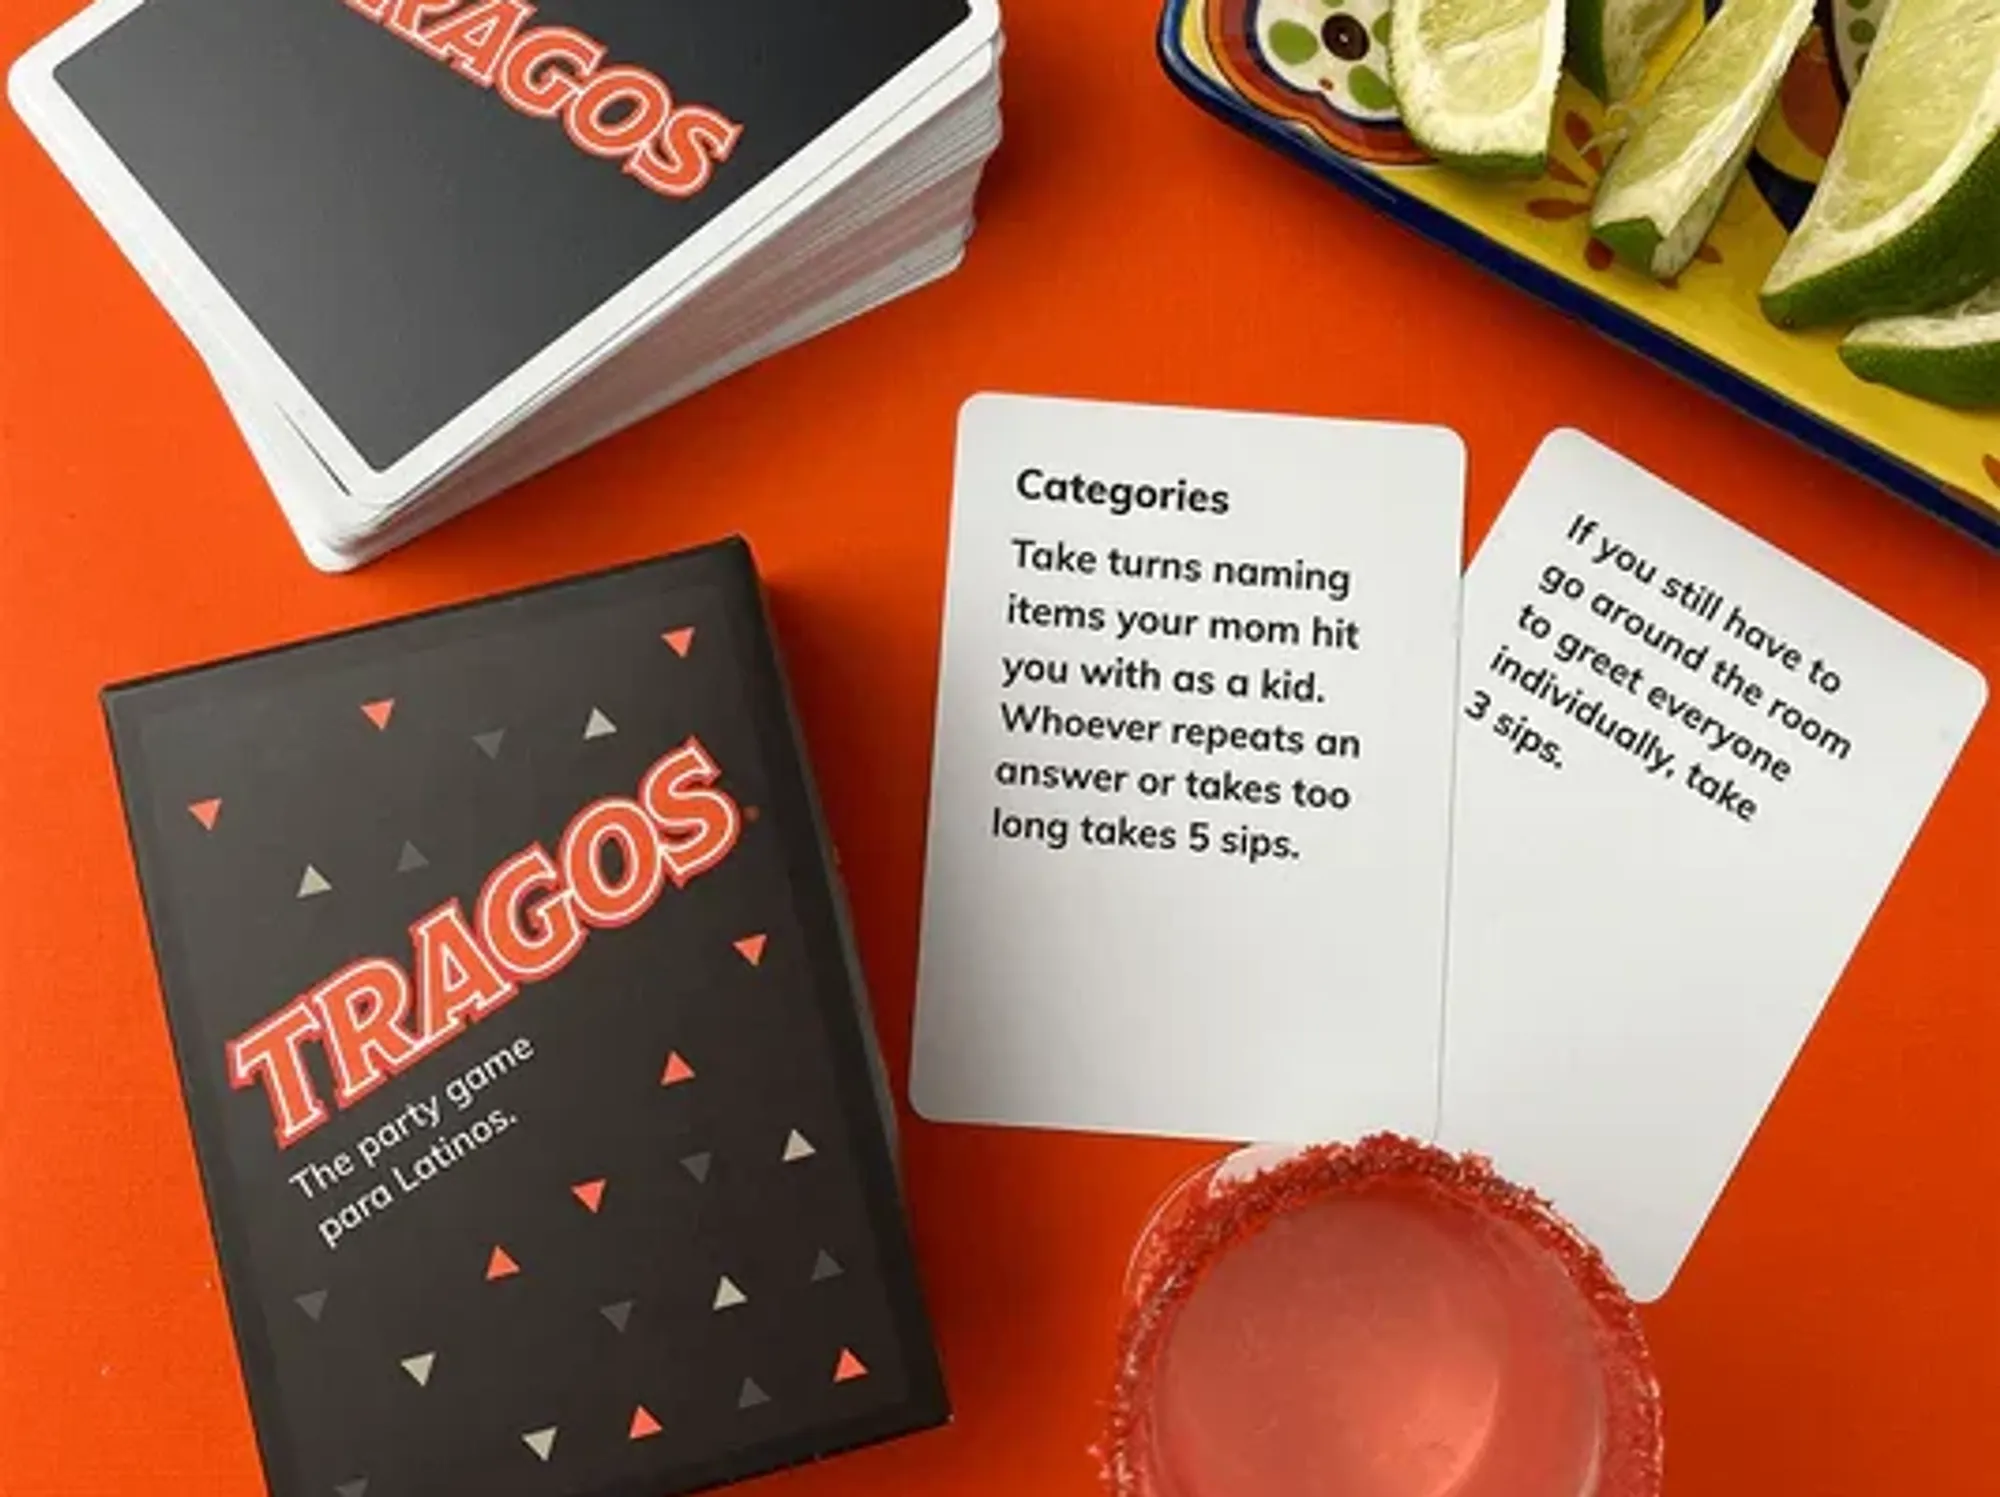 a promotional image for the tragos party game depicting a pair of cards along with a shot and limes